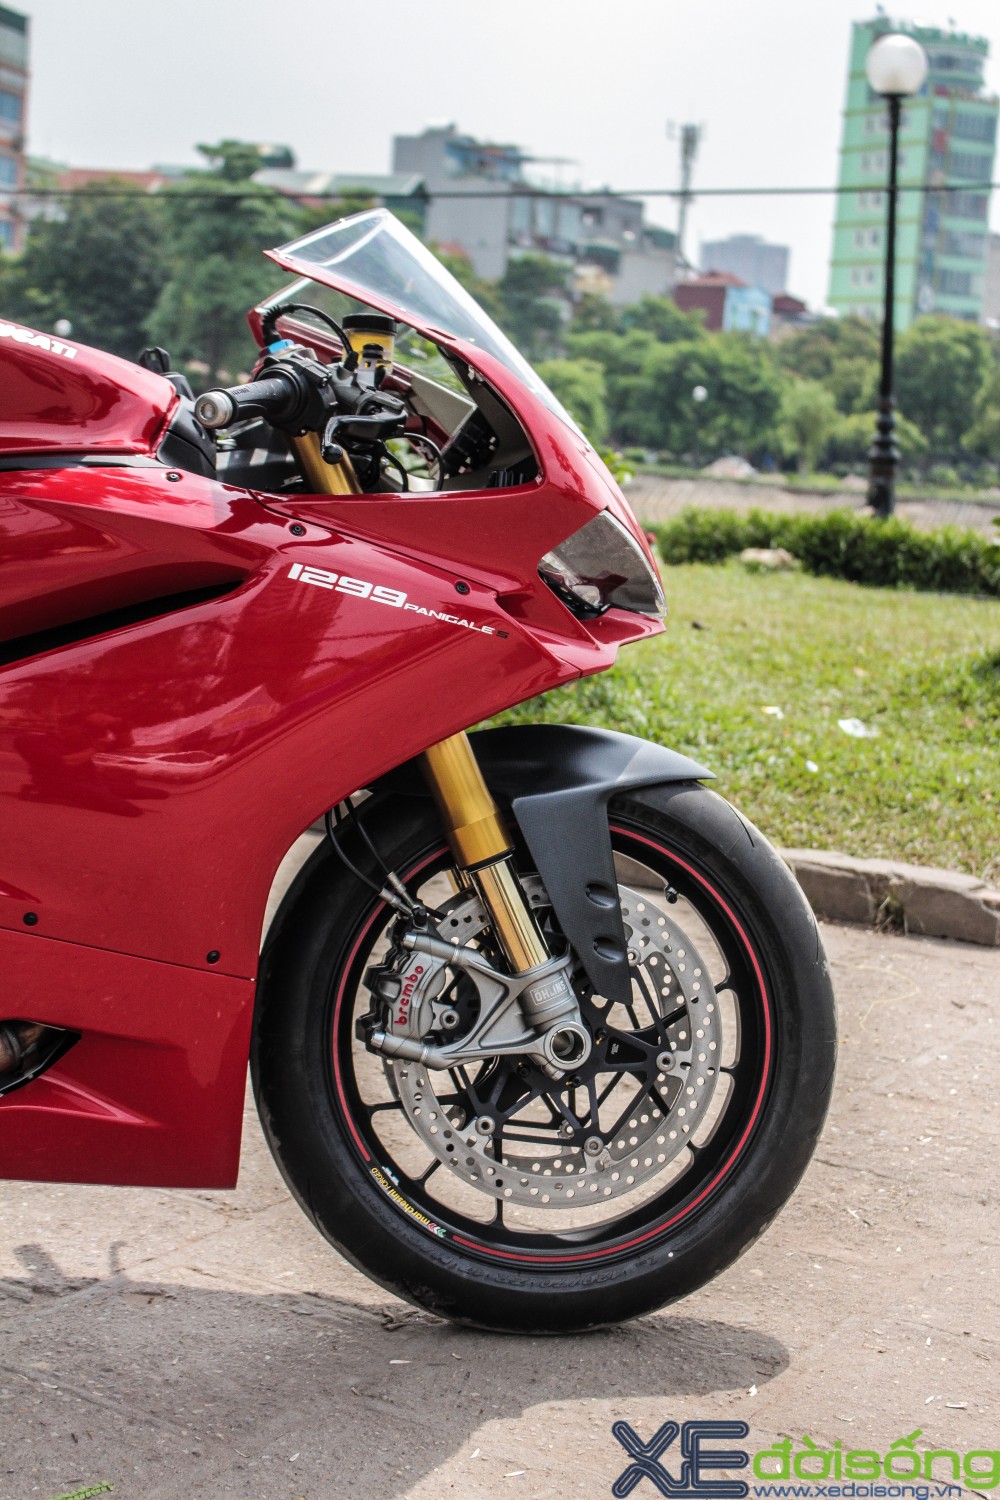 Can canh Ducati 1299 Panigale S dau tien tai Viet Nam voi gia 1 ty dong - 4